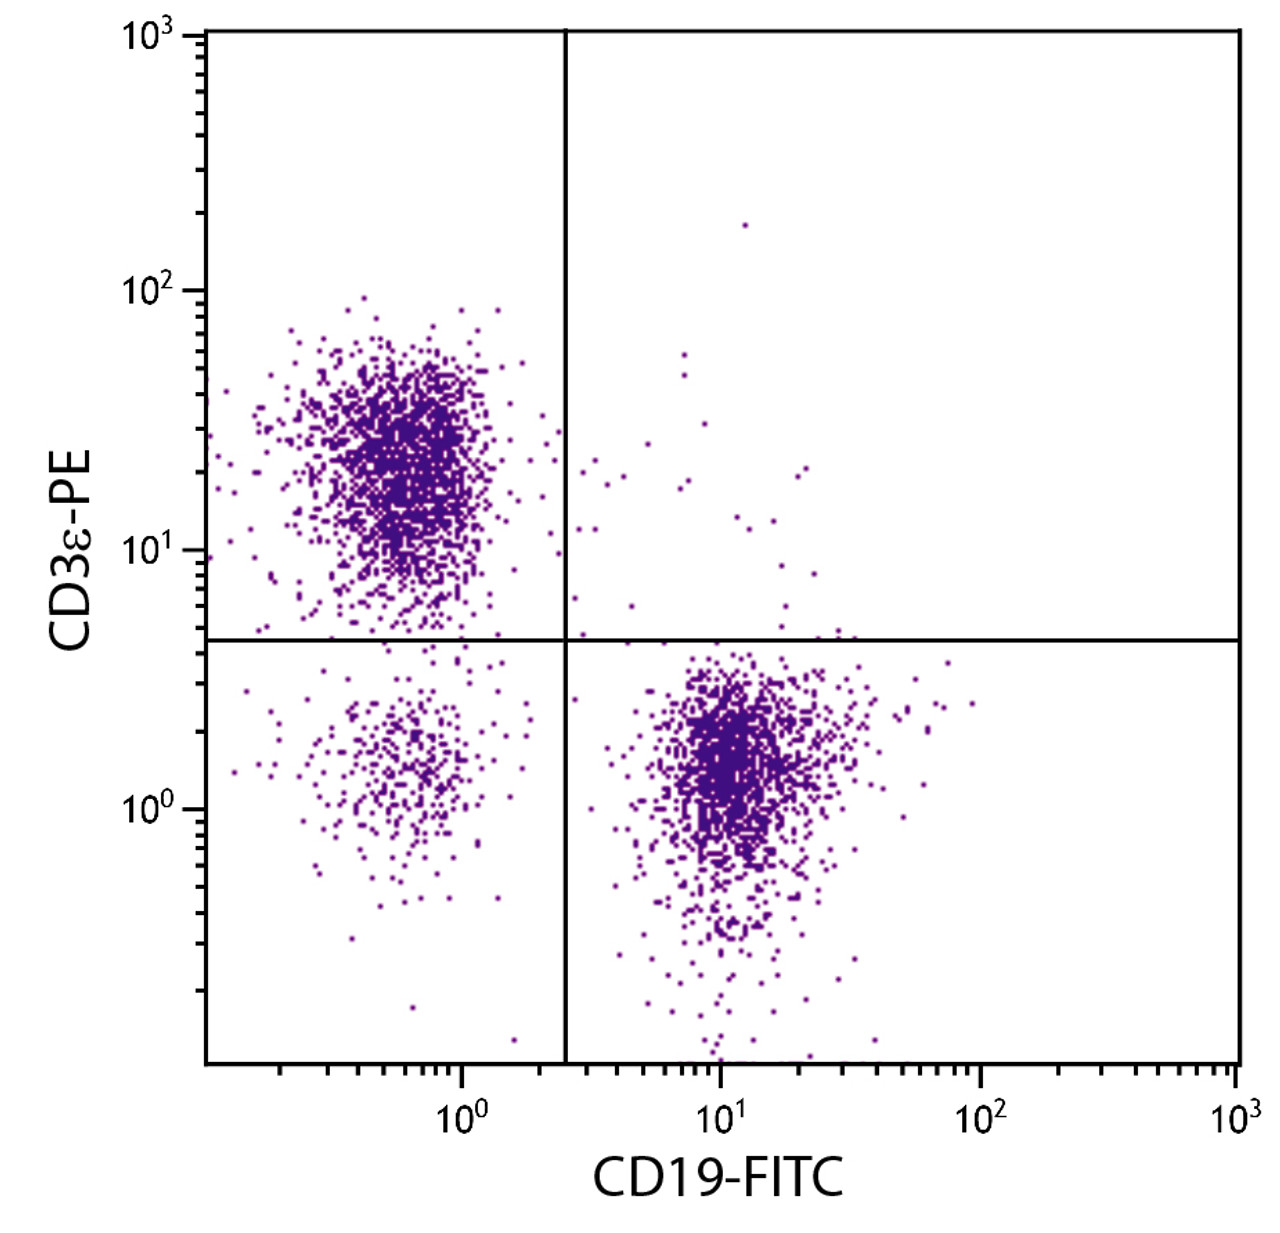 BALB/c mouse splenocytes were stained with Mouse Anti-Mouse CD19-FITC (Cat. No. 98-668) and Rat Anti-Mouse CD3?-PE .